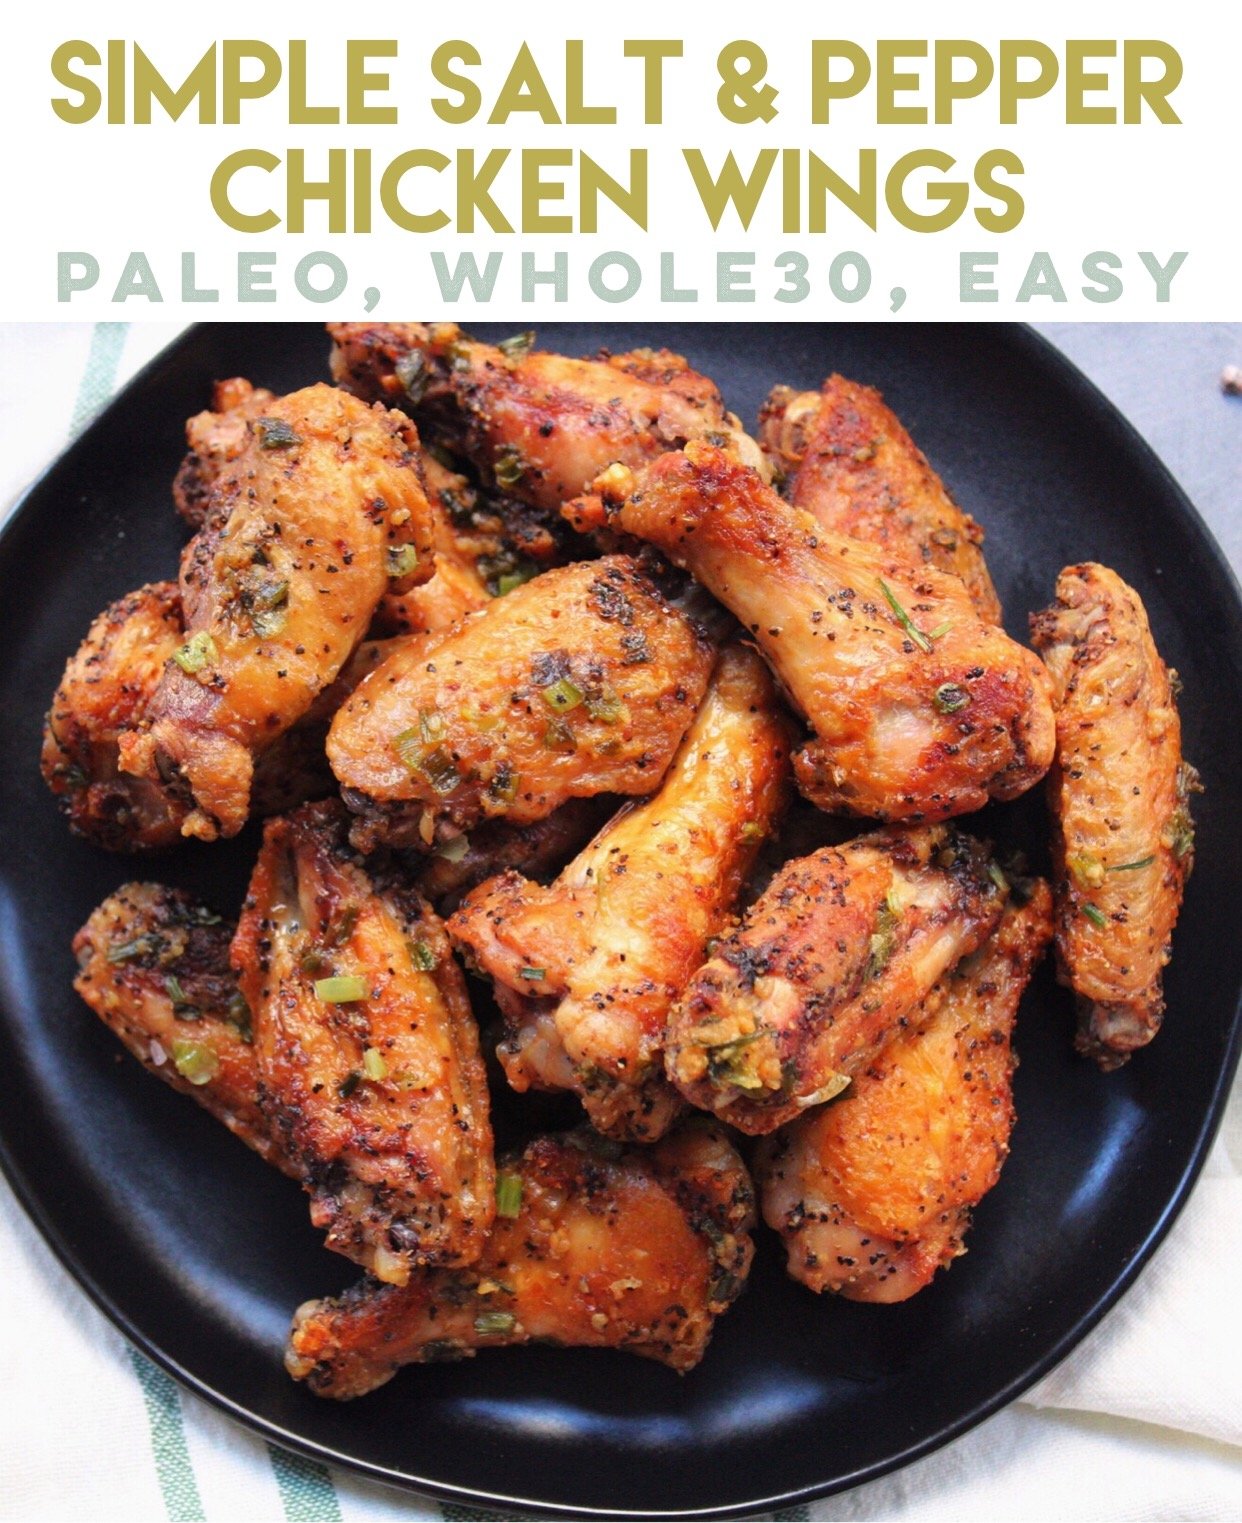 Simple Paleo Salt and Pepper Chicken Wings are easy to make, low carb only use a few ingredients, and are the perfect game day healthy wing recipe, or Whole30 chicken wing option! #paleochickenwings #paleo #whole30recipes #lowcarbchicken via @paleobailey